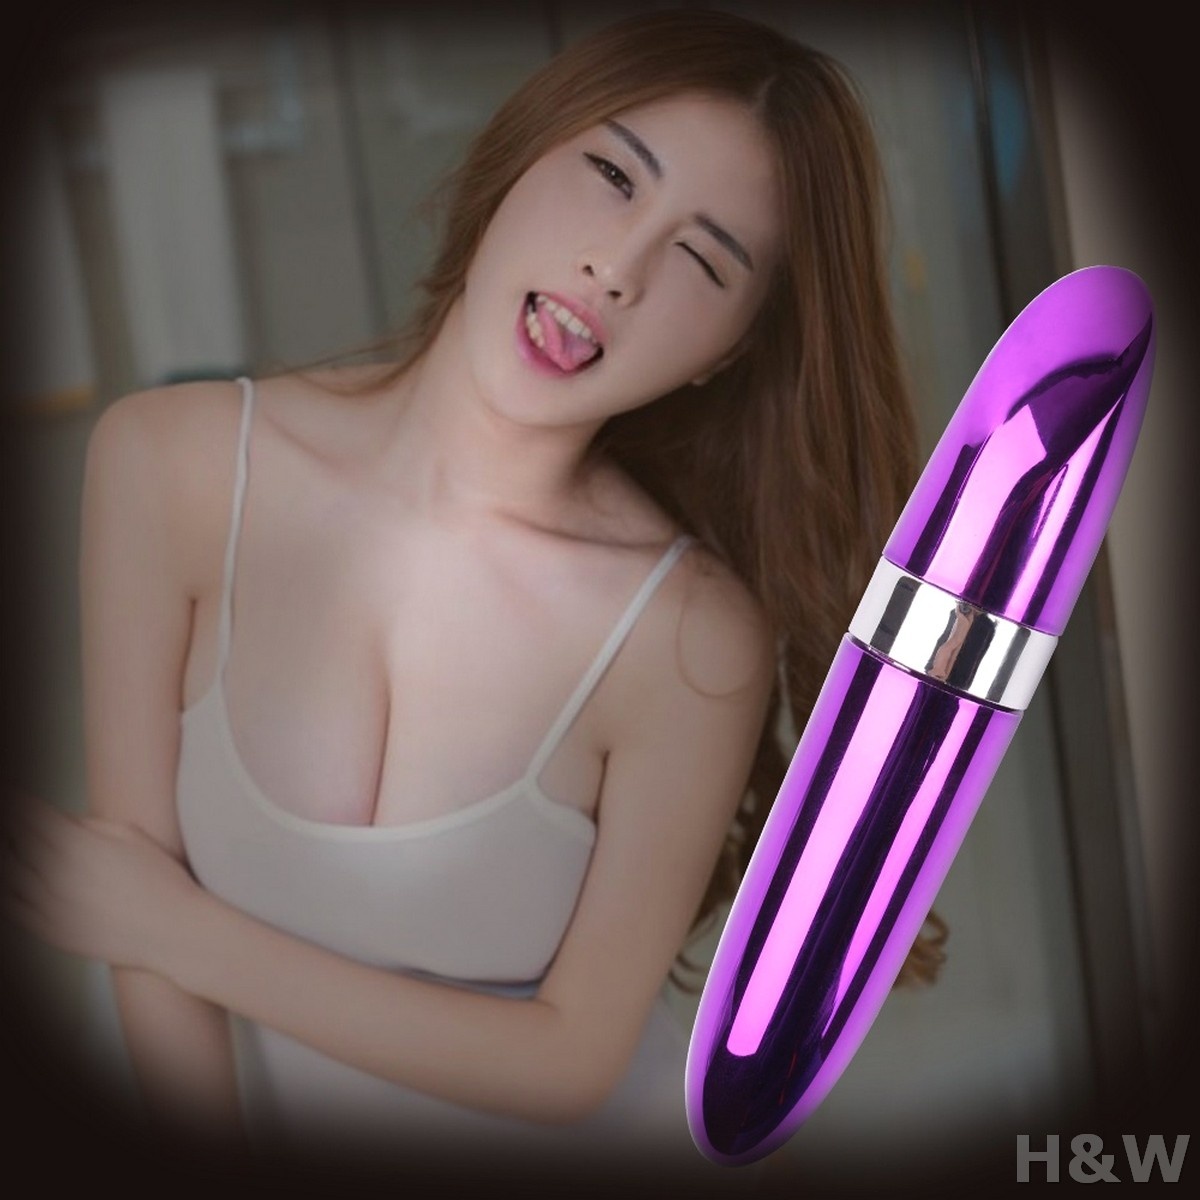 Secret Delivery-Portable Bullet Vibrator Lipstick Erotic Toys for Woman Adult Products